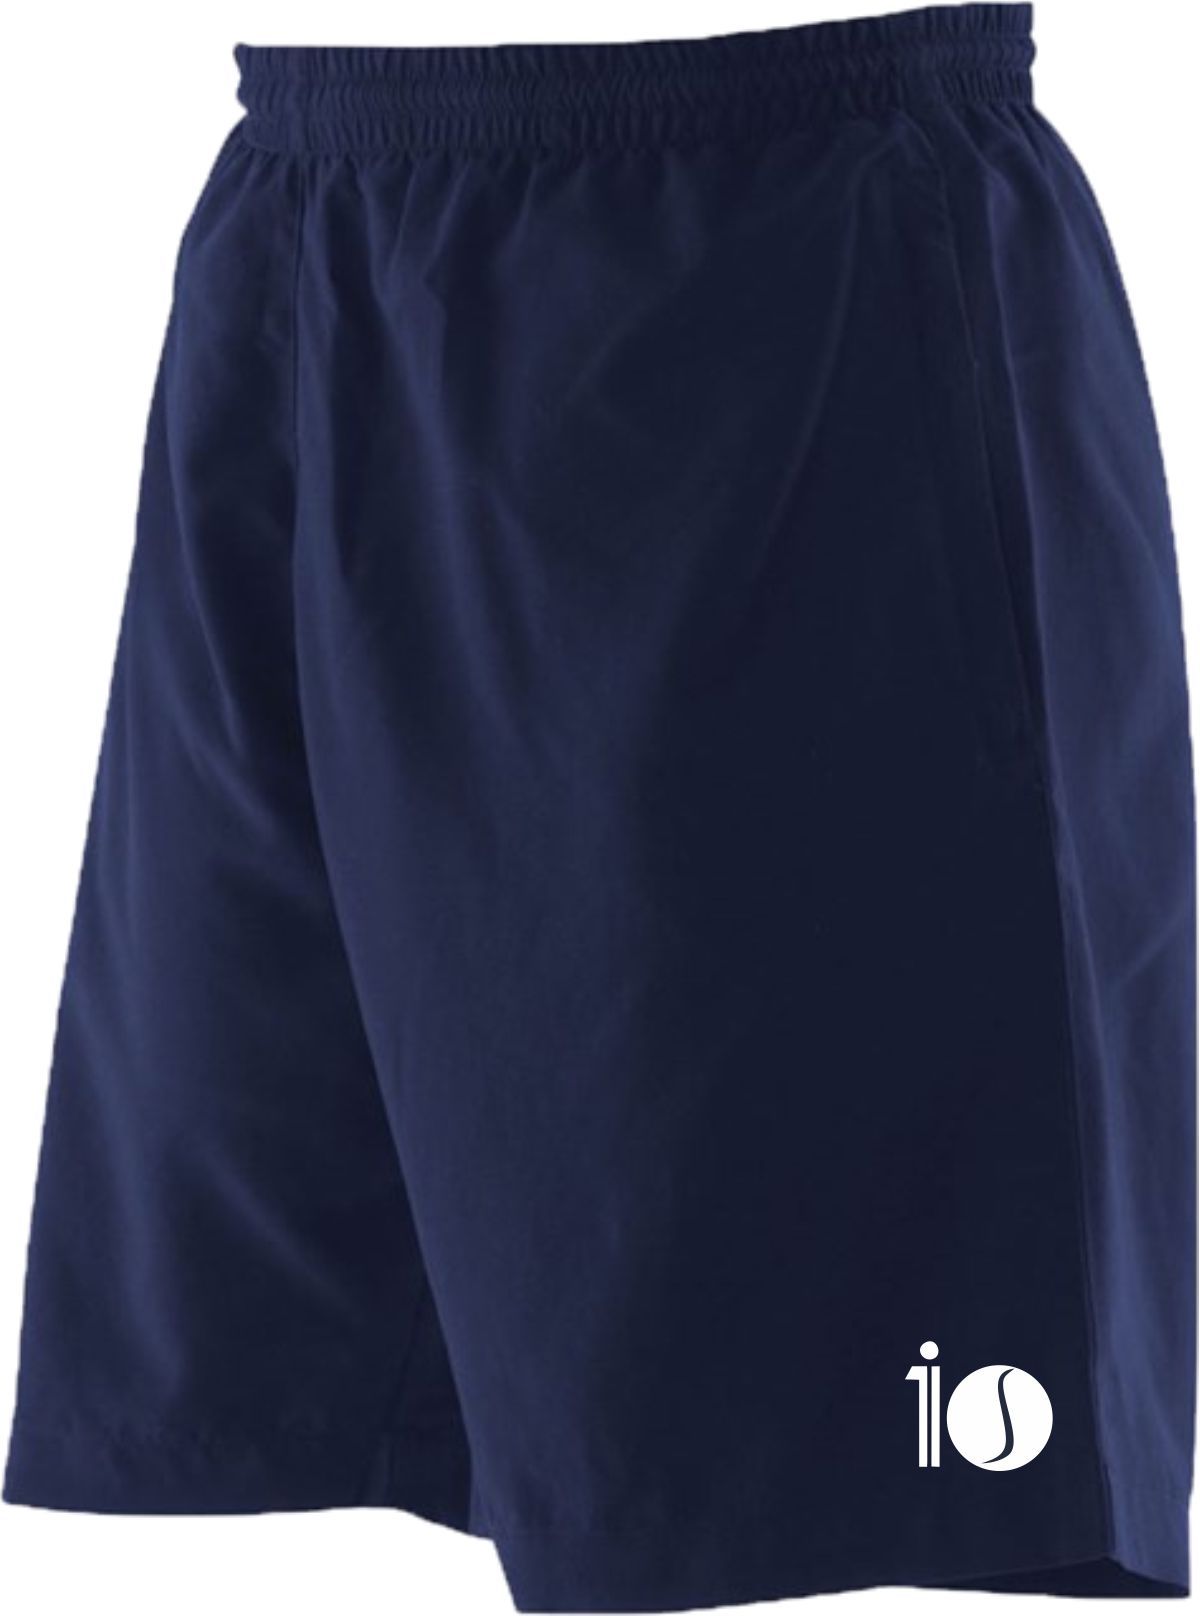 Coaching Staff - 10is Academy Microfibre Shorts (Unisex)